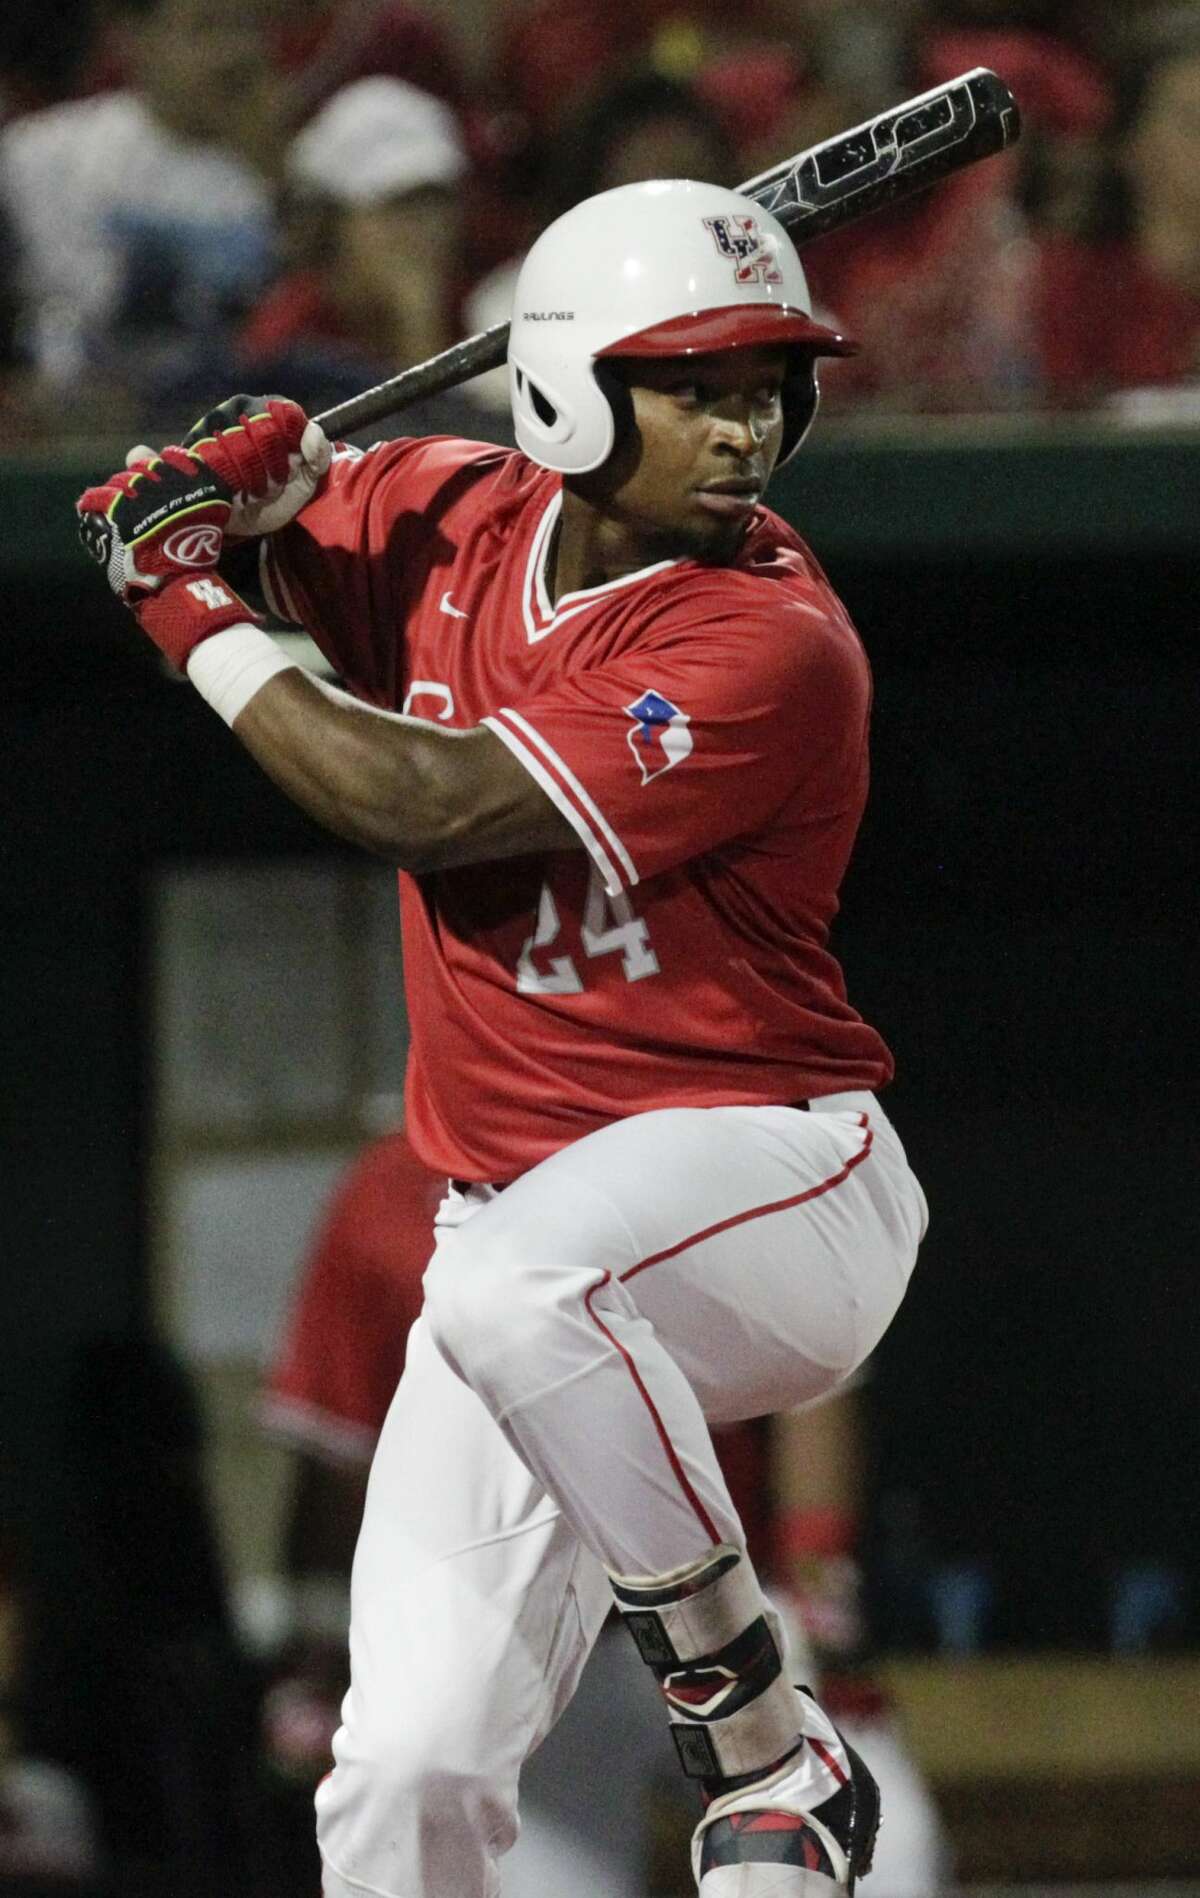 Houston outfielder Corey Julks (24) at bat during the 2017 NCAA Regional Game 5 against the Iowa at Darryl and Lori Schroeder Park Sunday, June 4, 2017, in Houston. Houston Cougars defeated Iowa Hawkeyes 7-5. ( Yi-Chin Lee / Houston Chronicle )